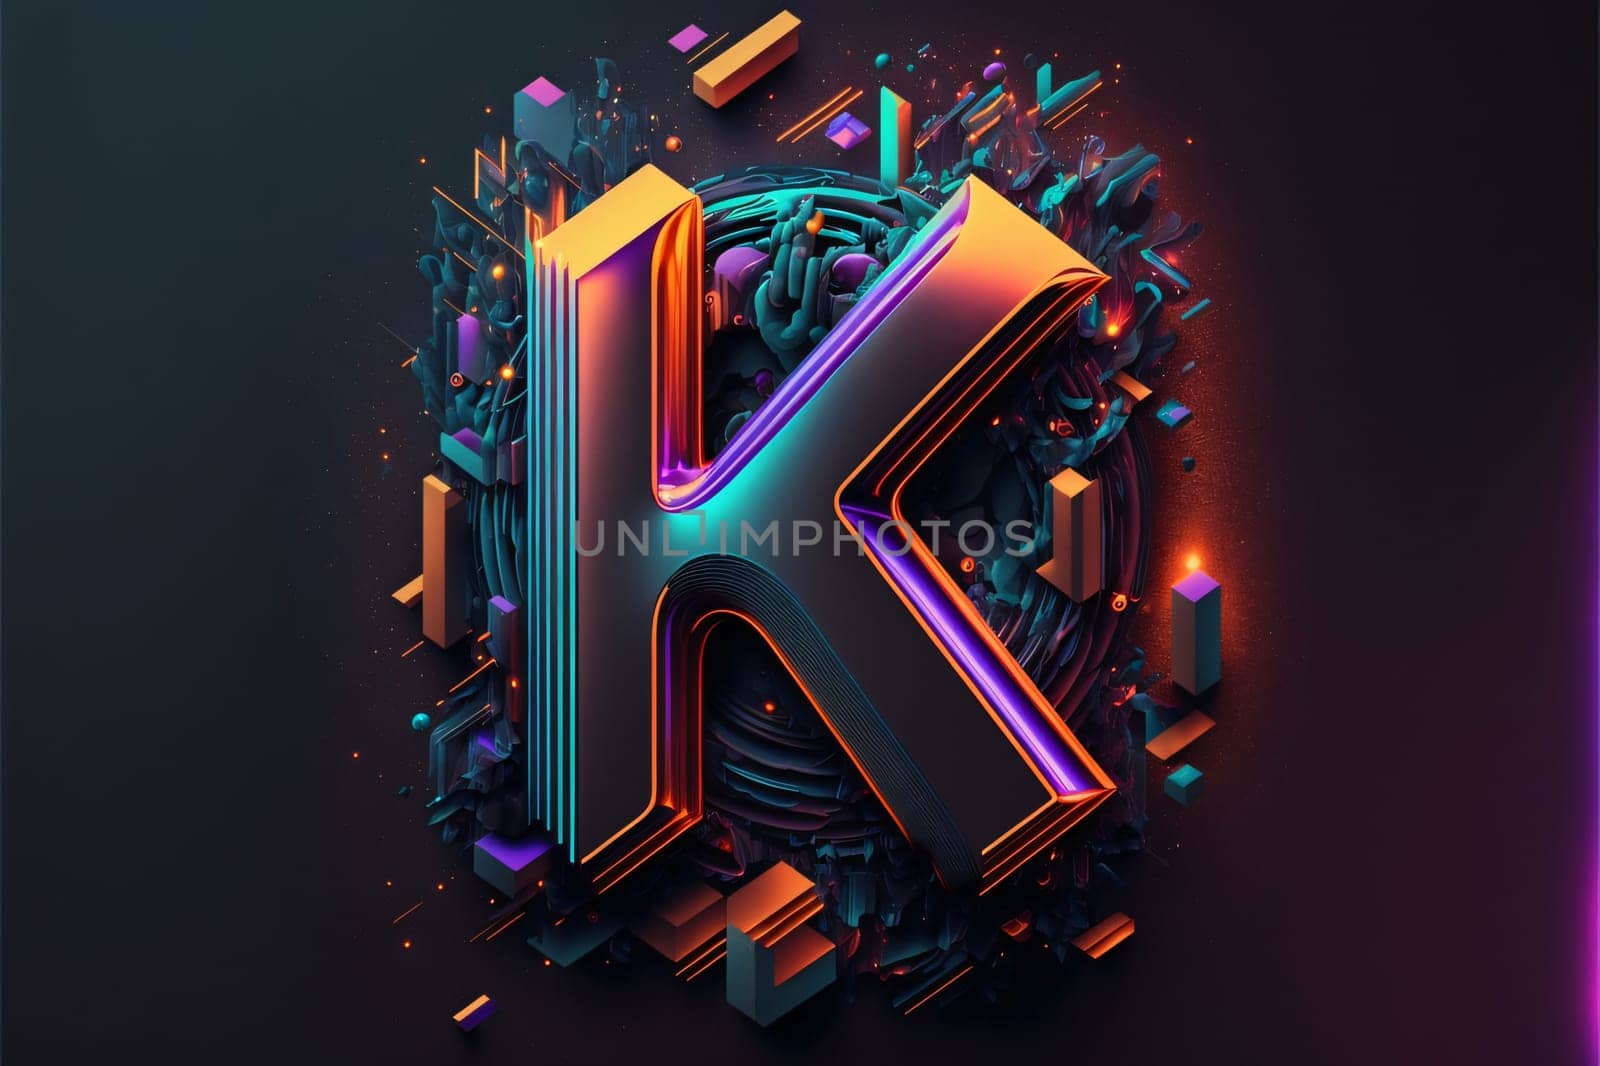 Graphic alphabet letters: 3d illustration of letter K in neon style. Letter K is located in the center of the frame.